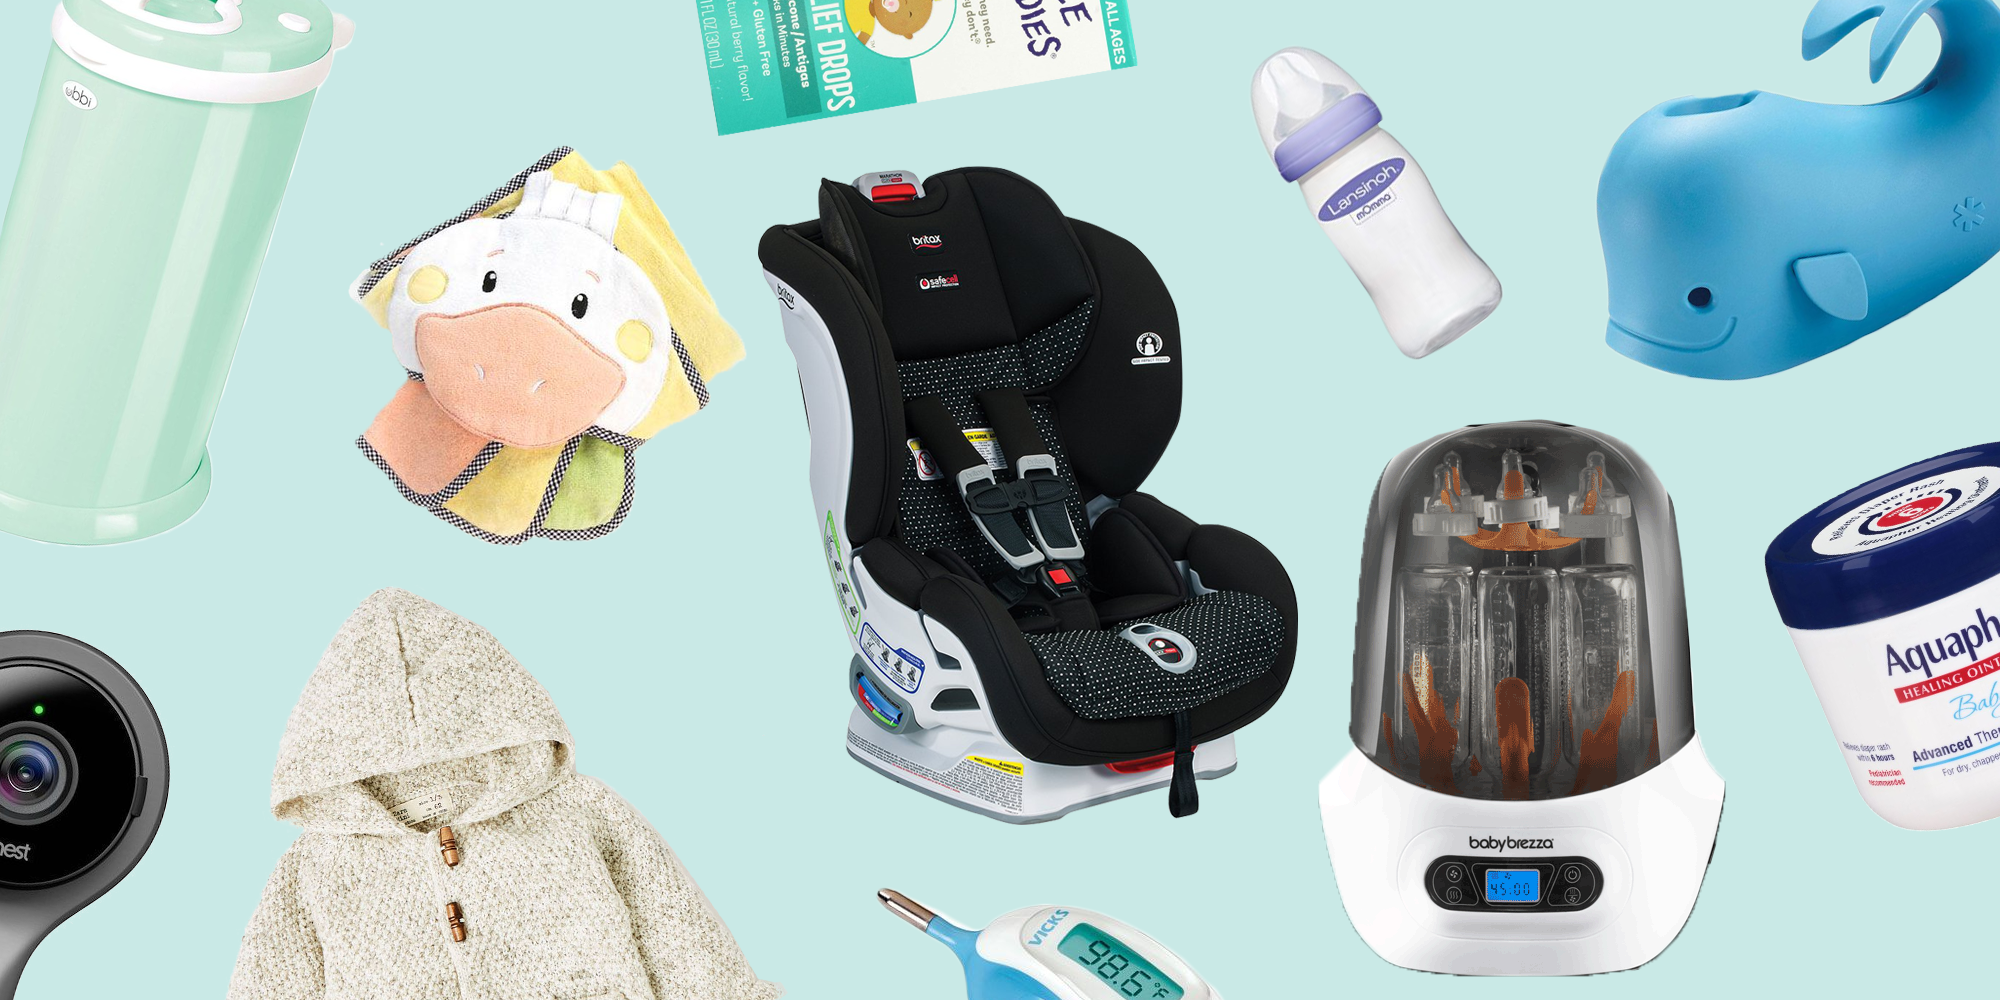 15 Most Popular Baby Items on 2020